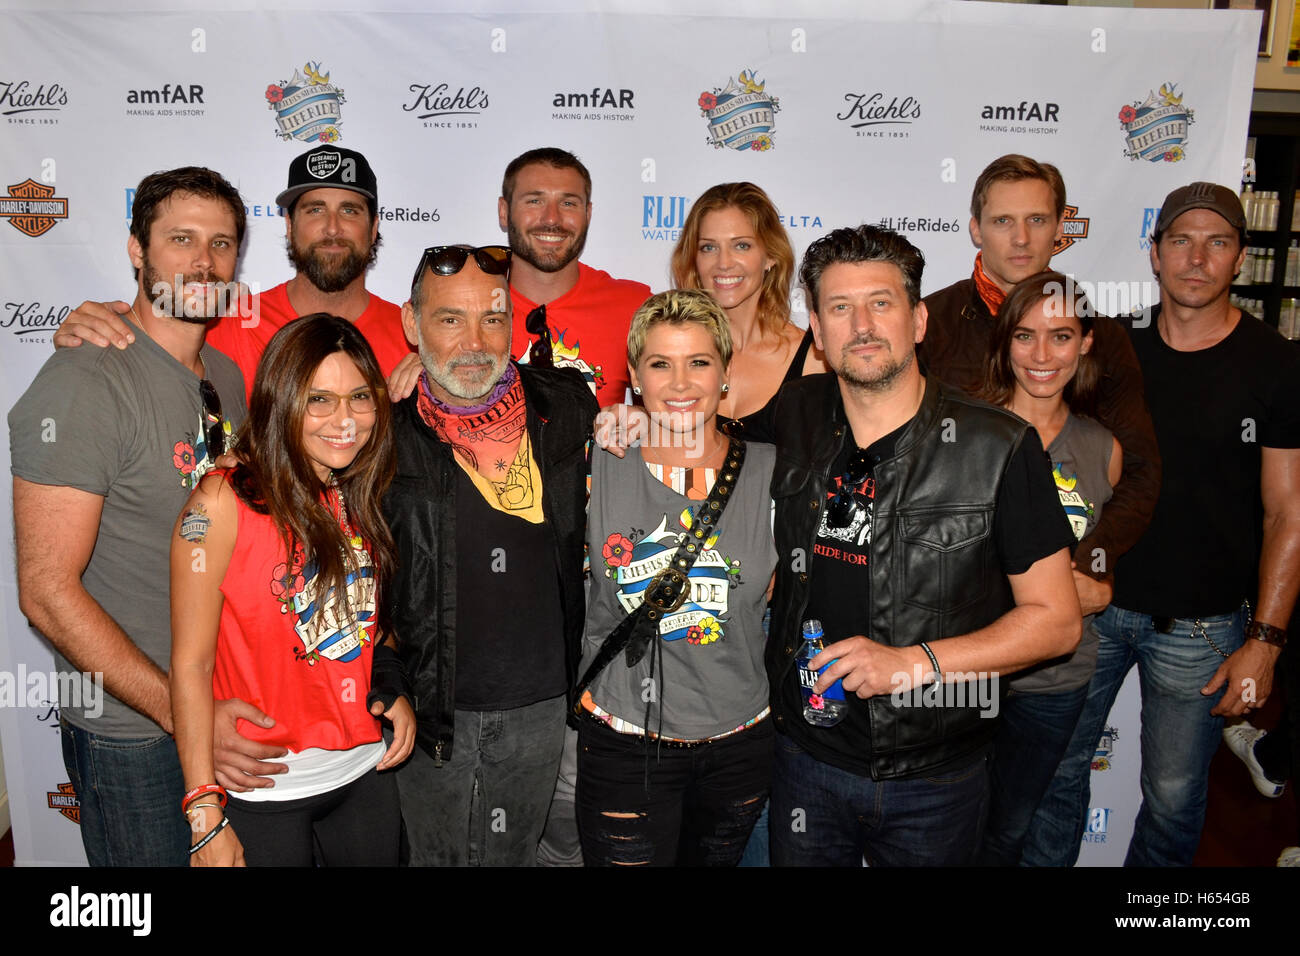 Tricia Helfer, Teddy Sears, Vanessa Marcil, Timothy White and Kristy Swanson attended 6th Annual Kiehl's LifeRide For amfAR Celebration at Kiehl's Since 1851 Stock Photo